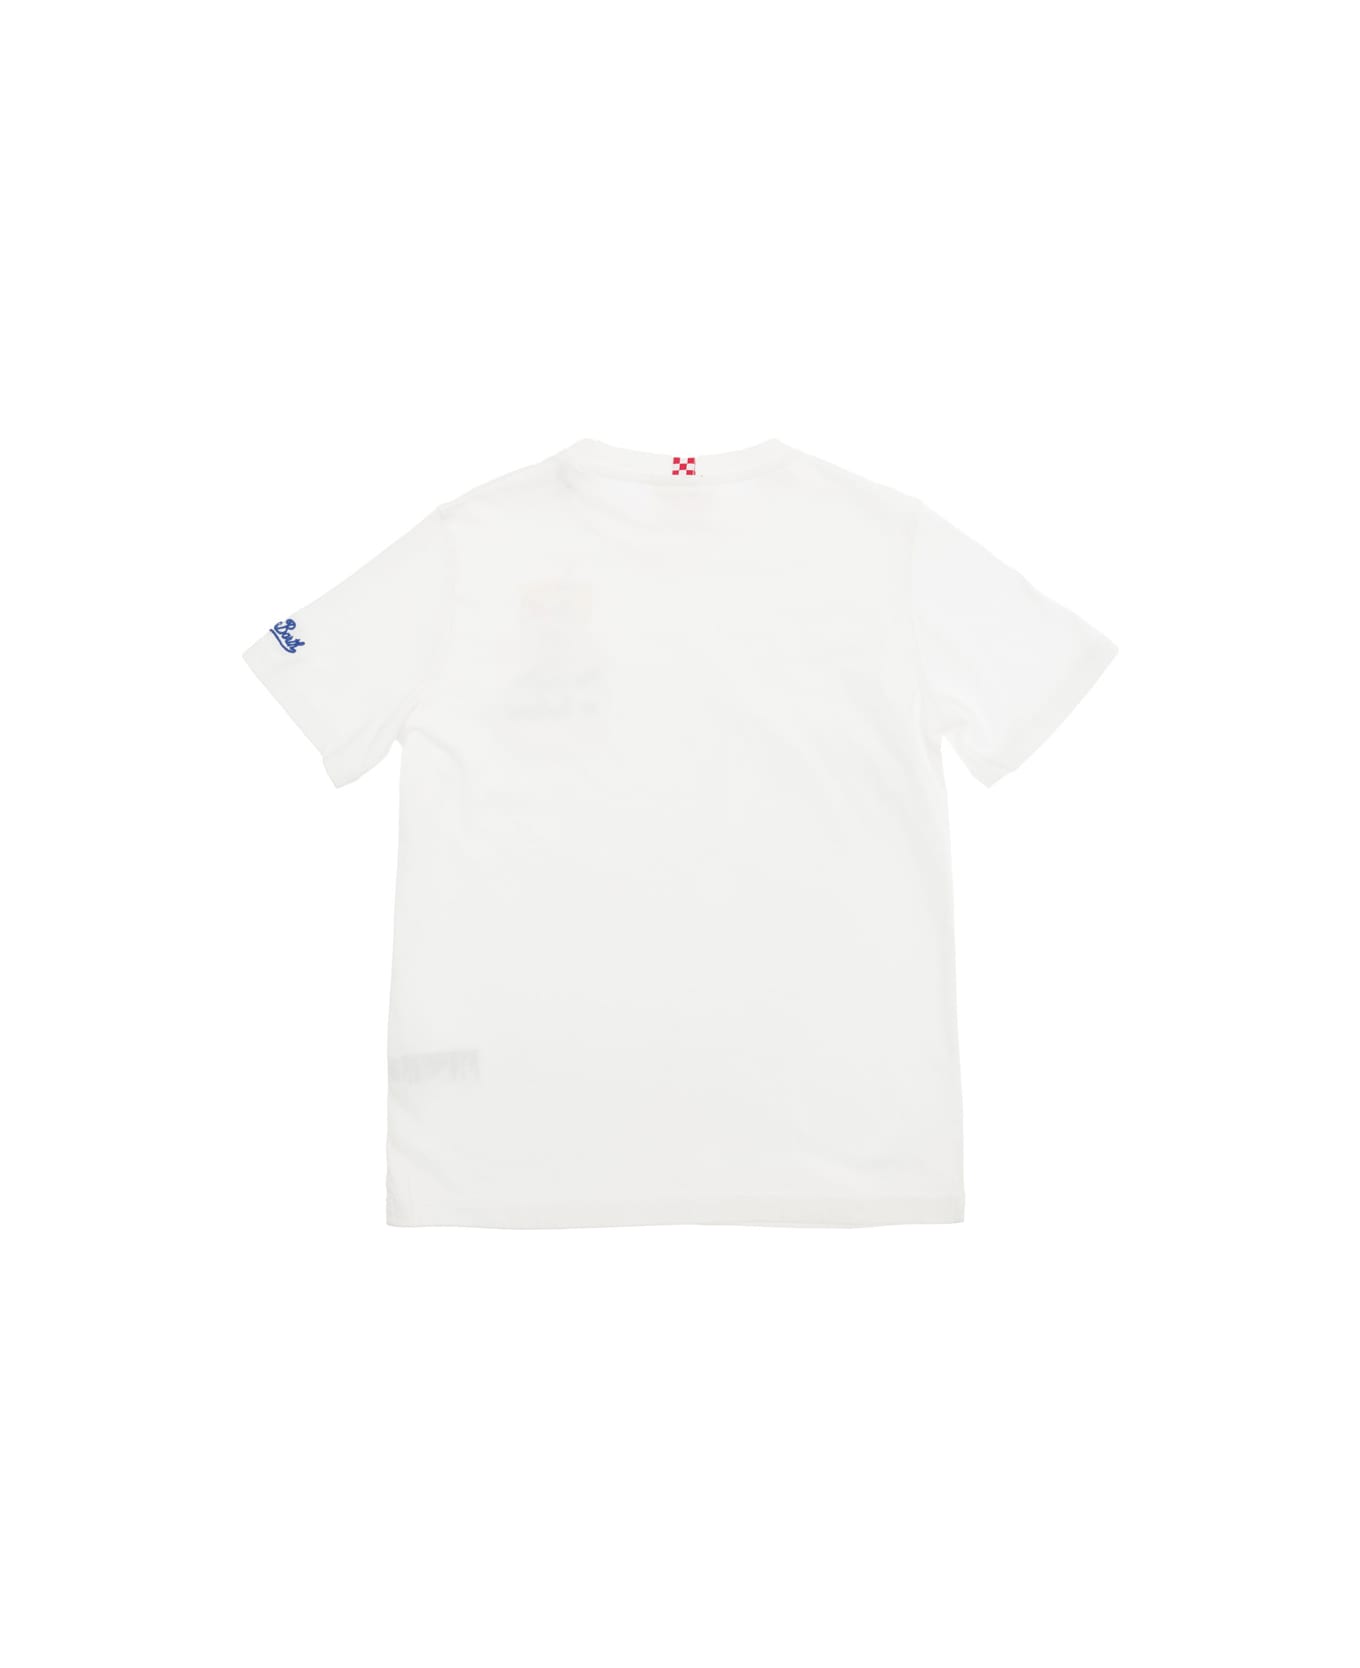 MC2 Saint Barth 'eddy' White T-shirt With Estathé Print And Embroidery In Cotton Baby - White